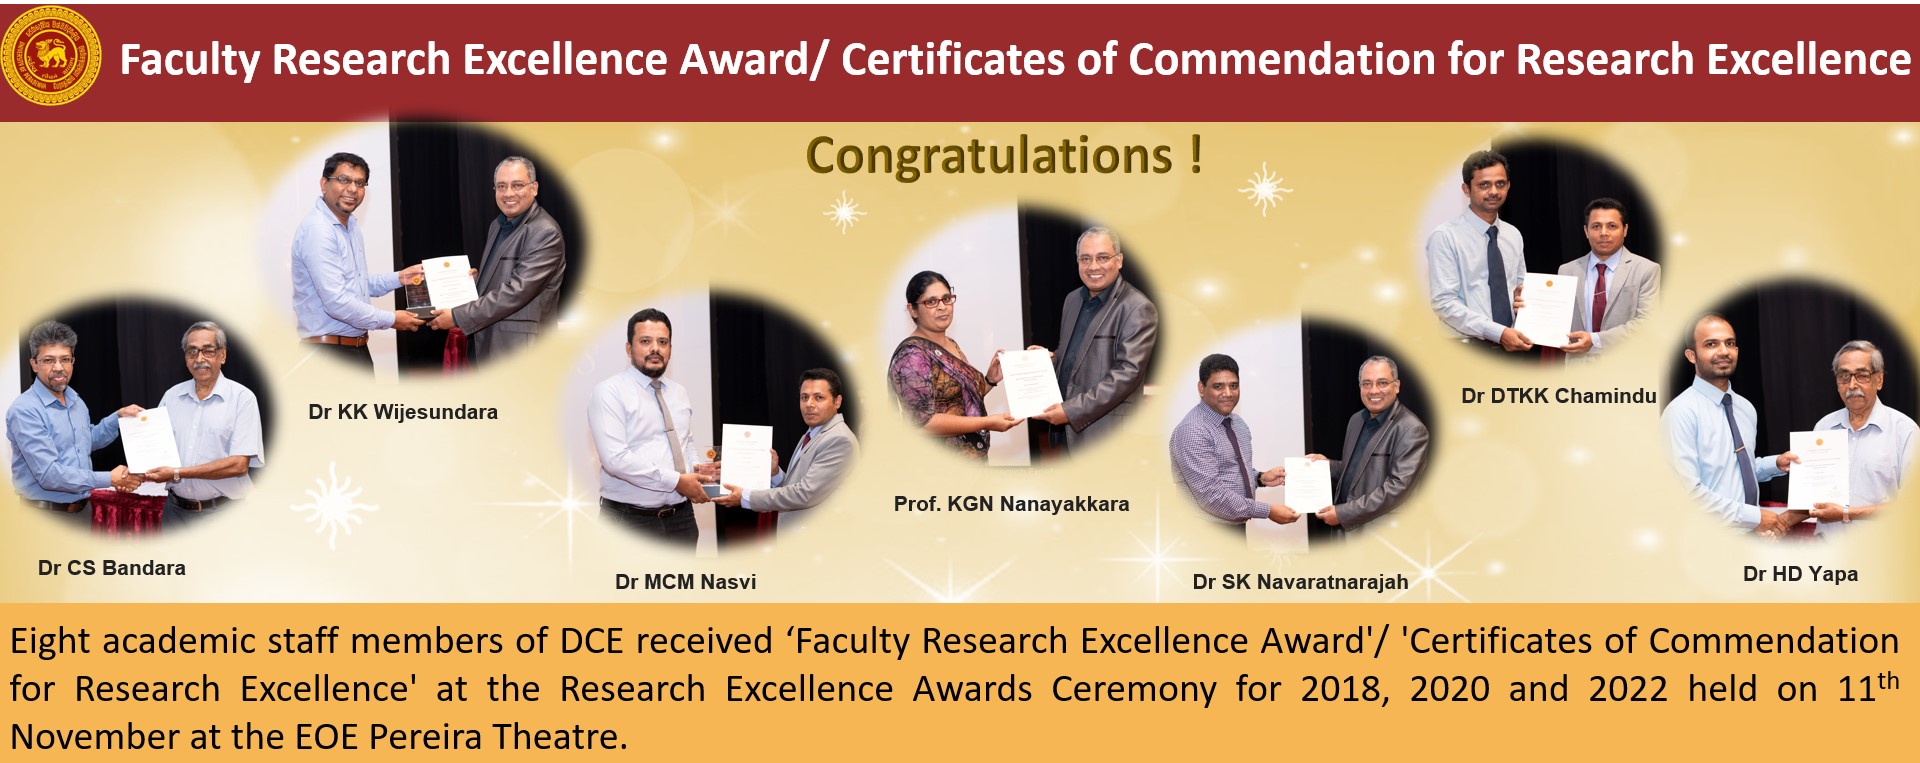 Faculty Research Excellence Award/ Certificates of Commendation